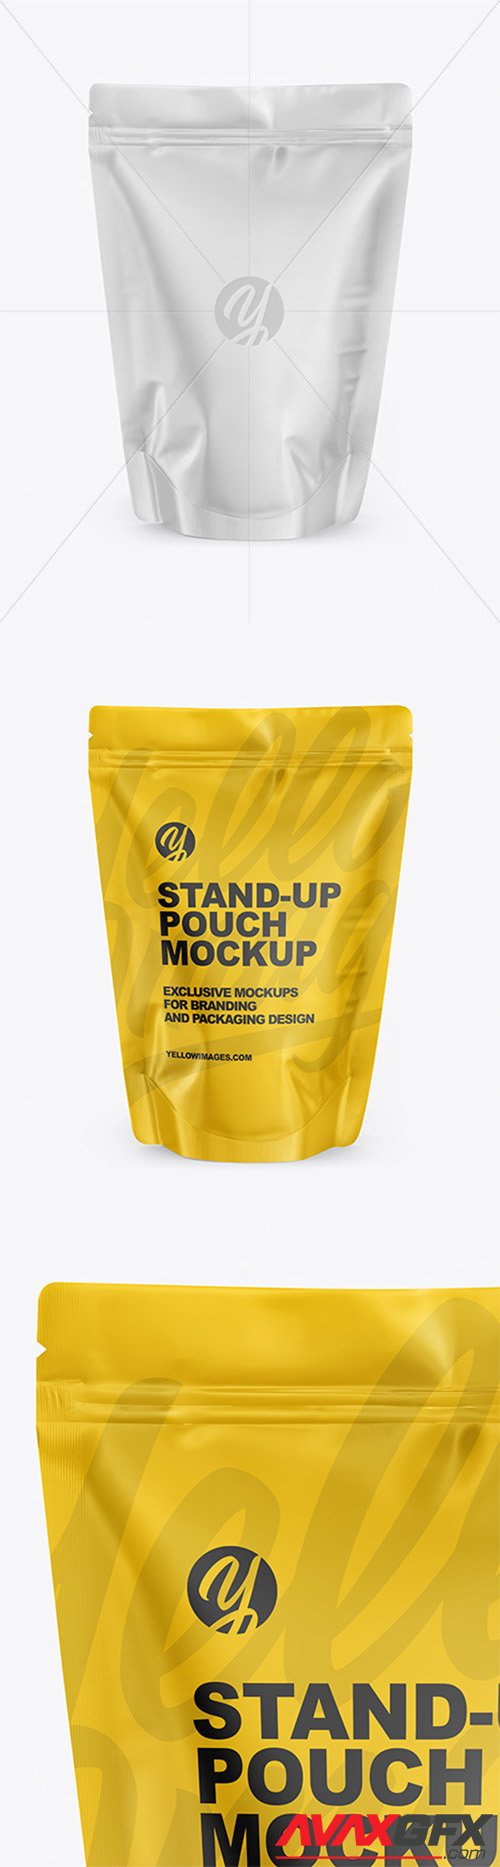 Stand Up Pouch Mockup Set Avaxgfx All Downloads That You Need In One Place Graphic From Nitroflare Rapidgator